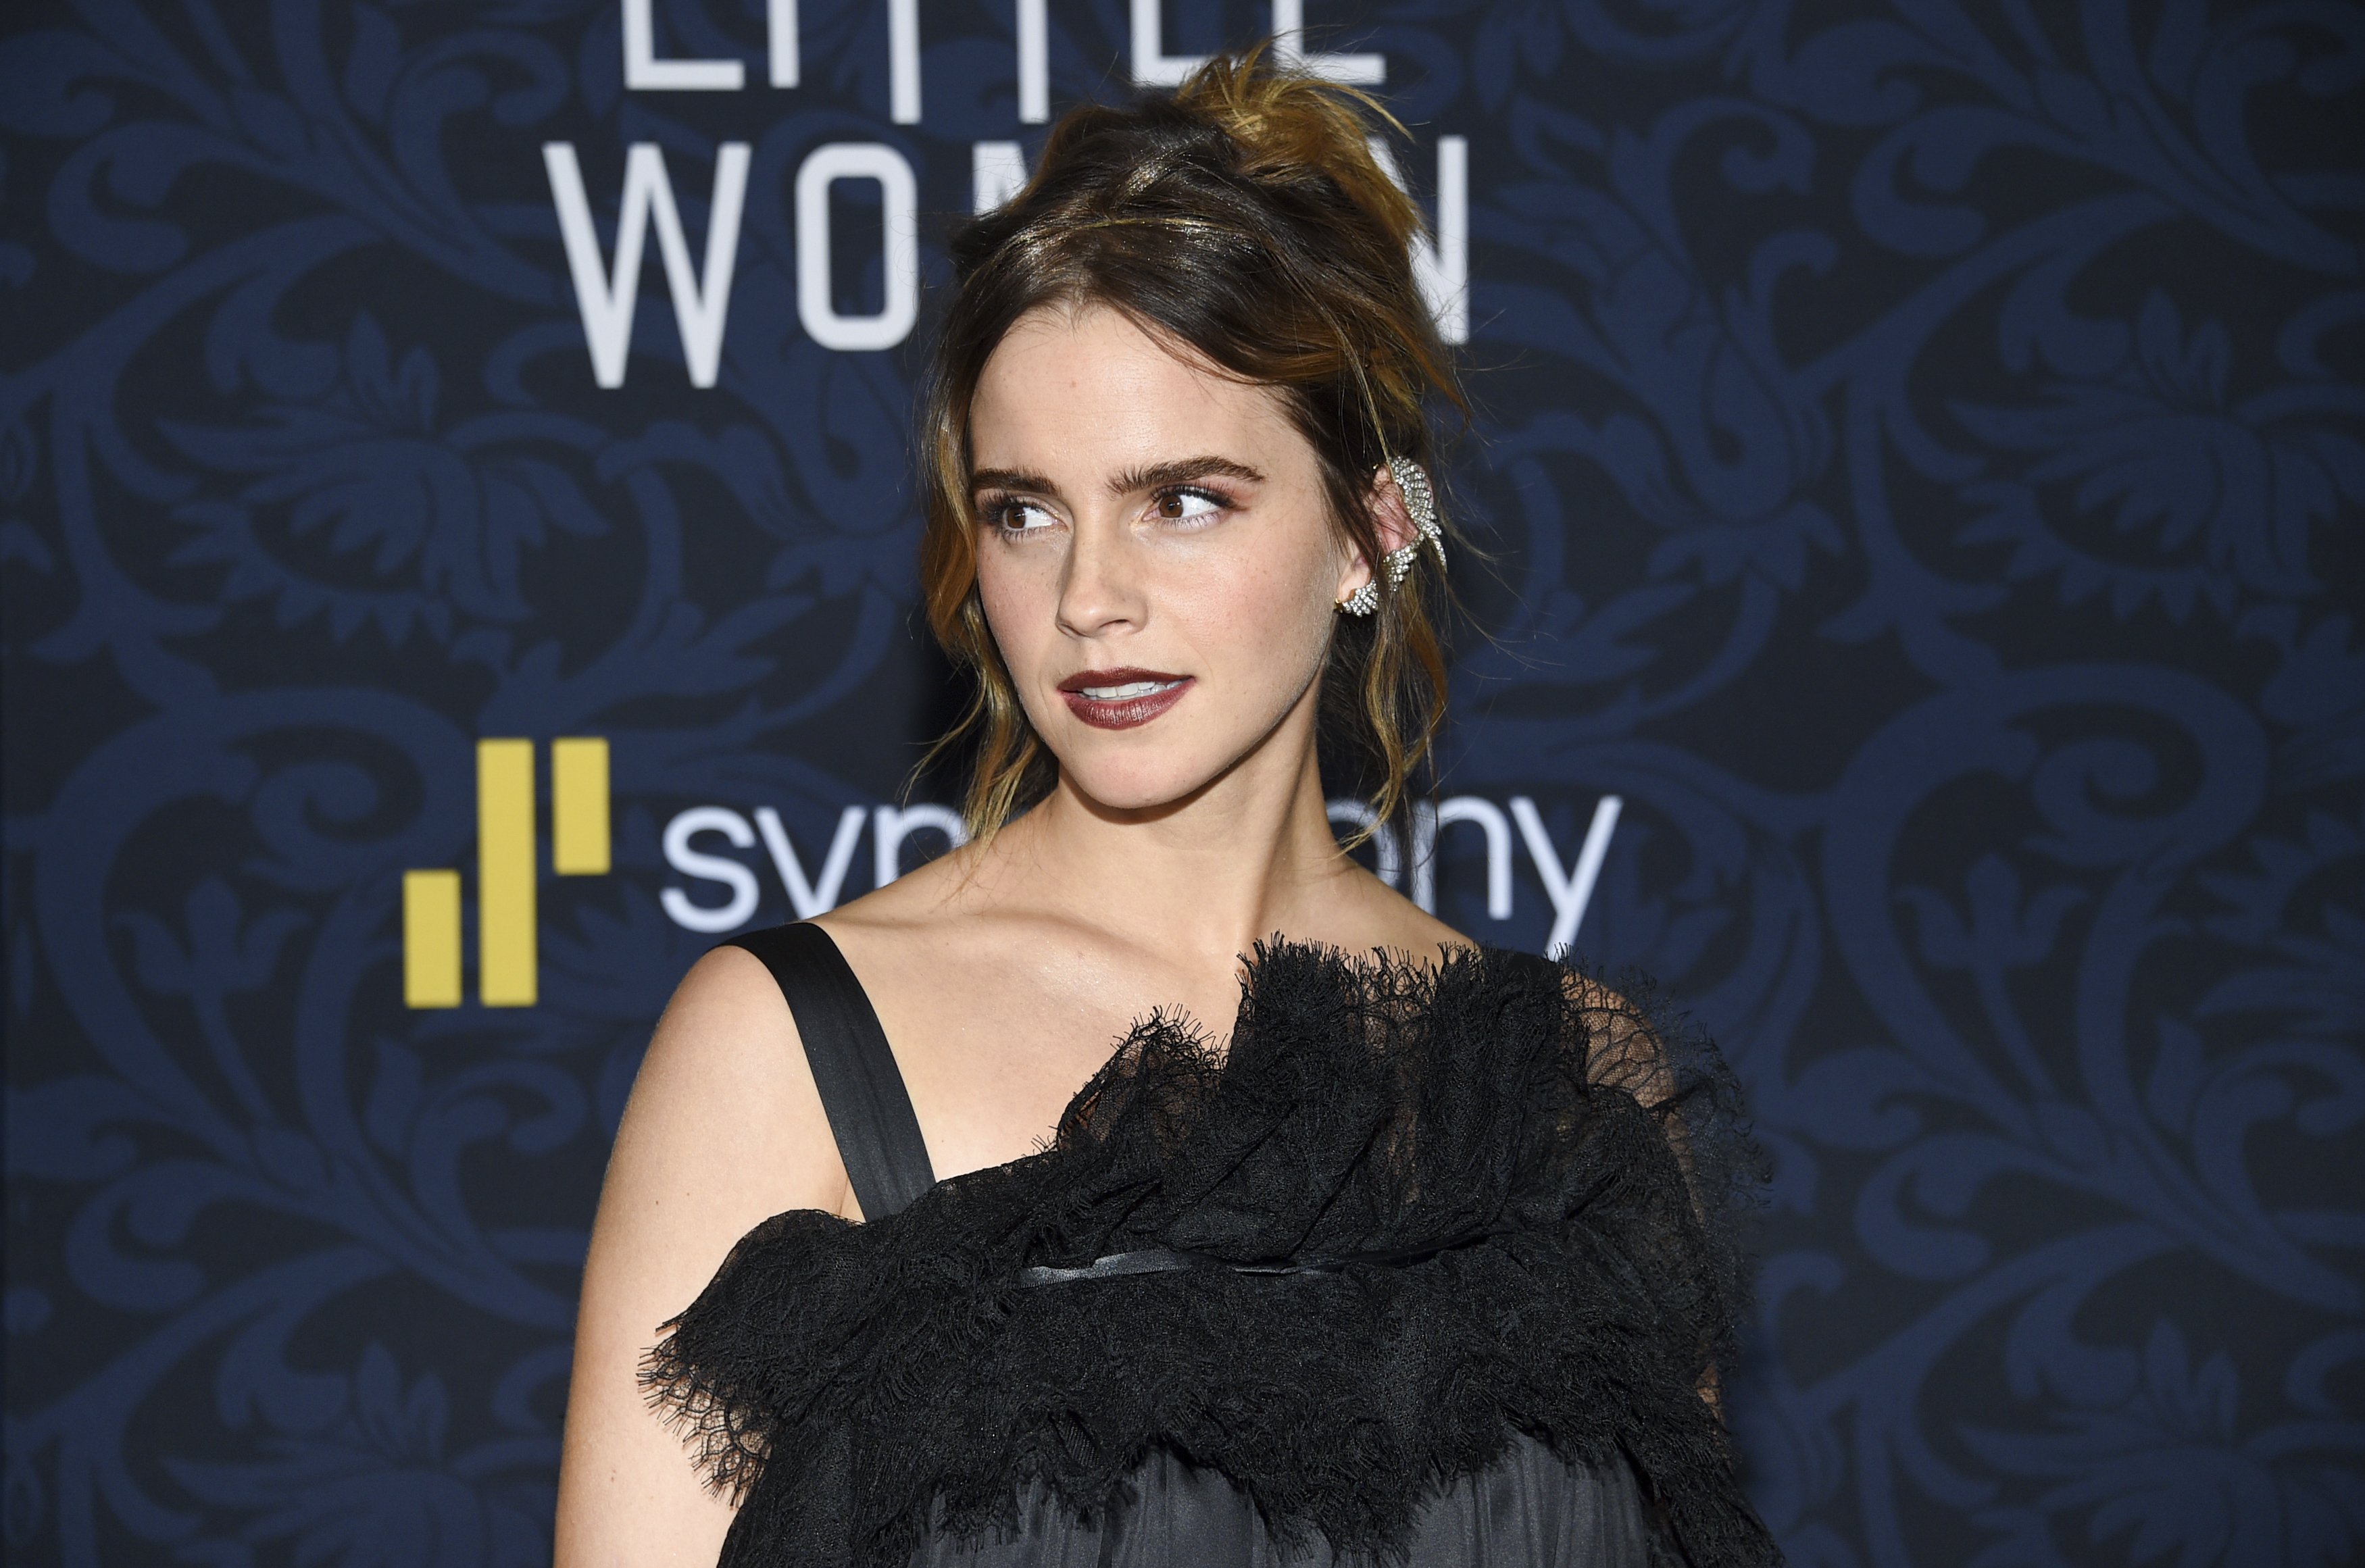 Emma Watson on why she stepped away from acting